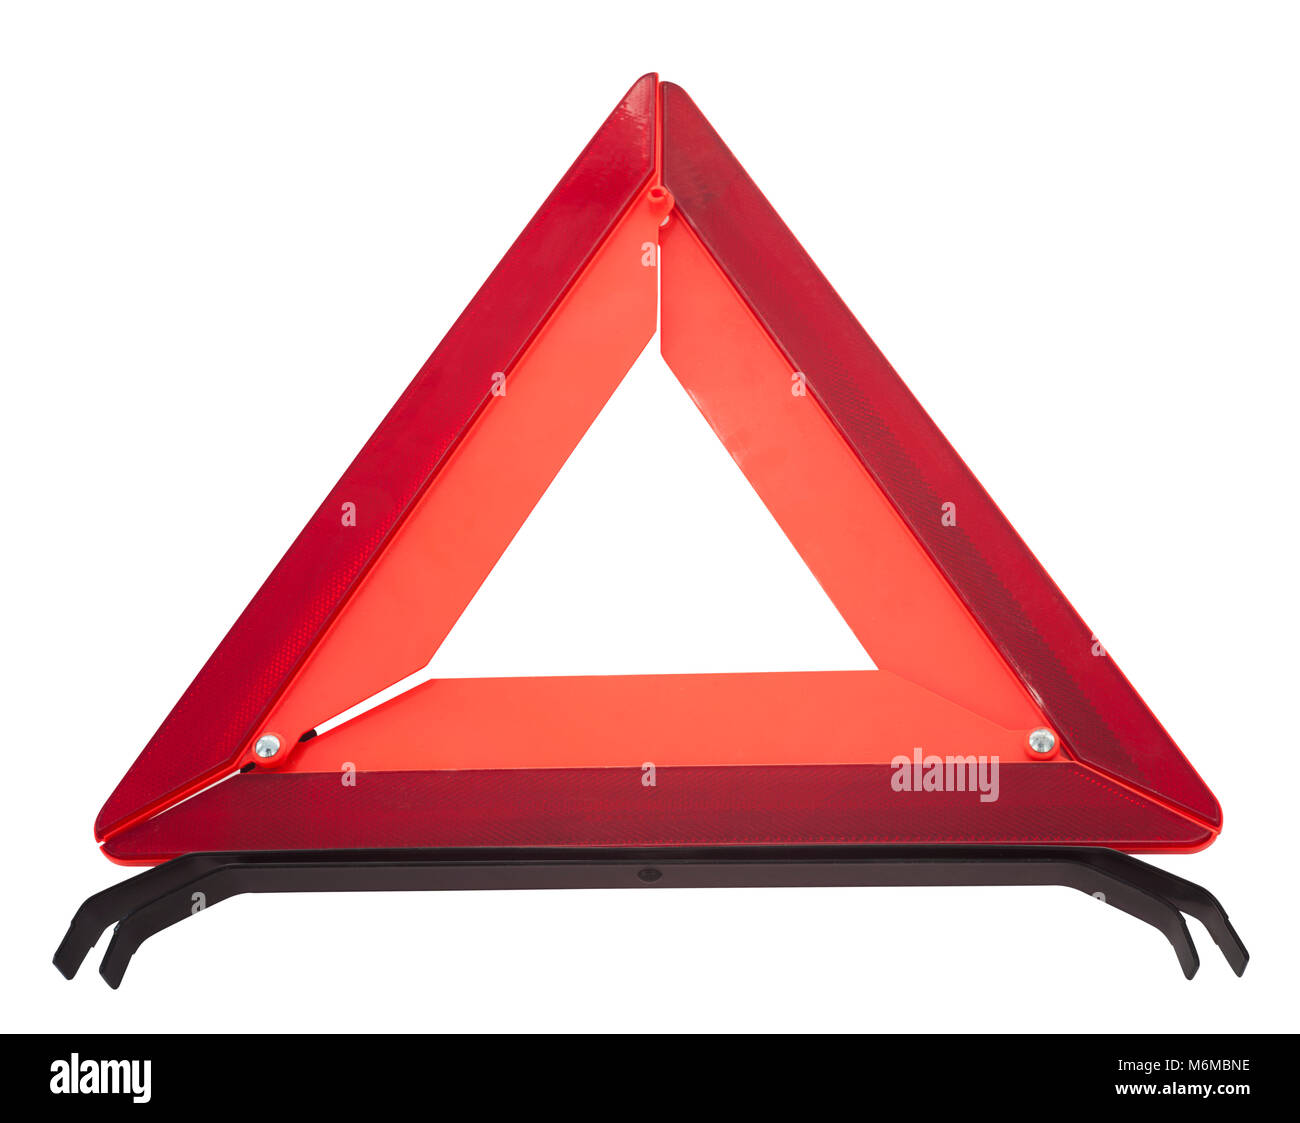 red triangle for emergency kit, auto tools. isolated on white background Stock Photo